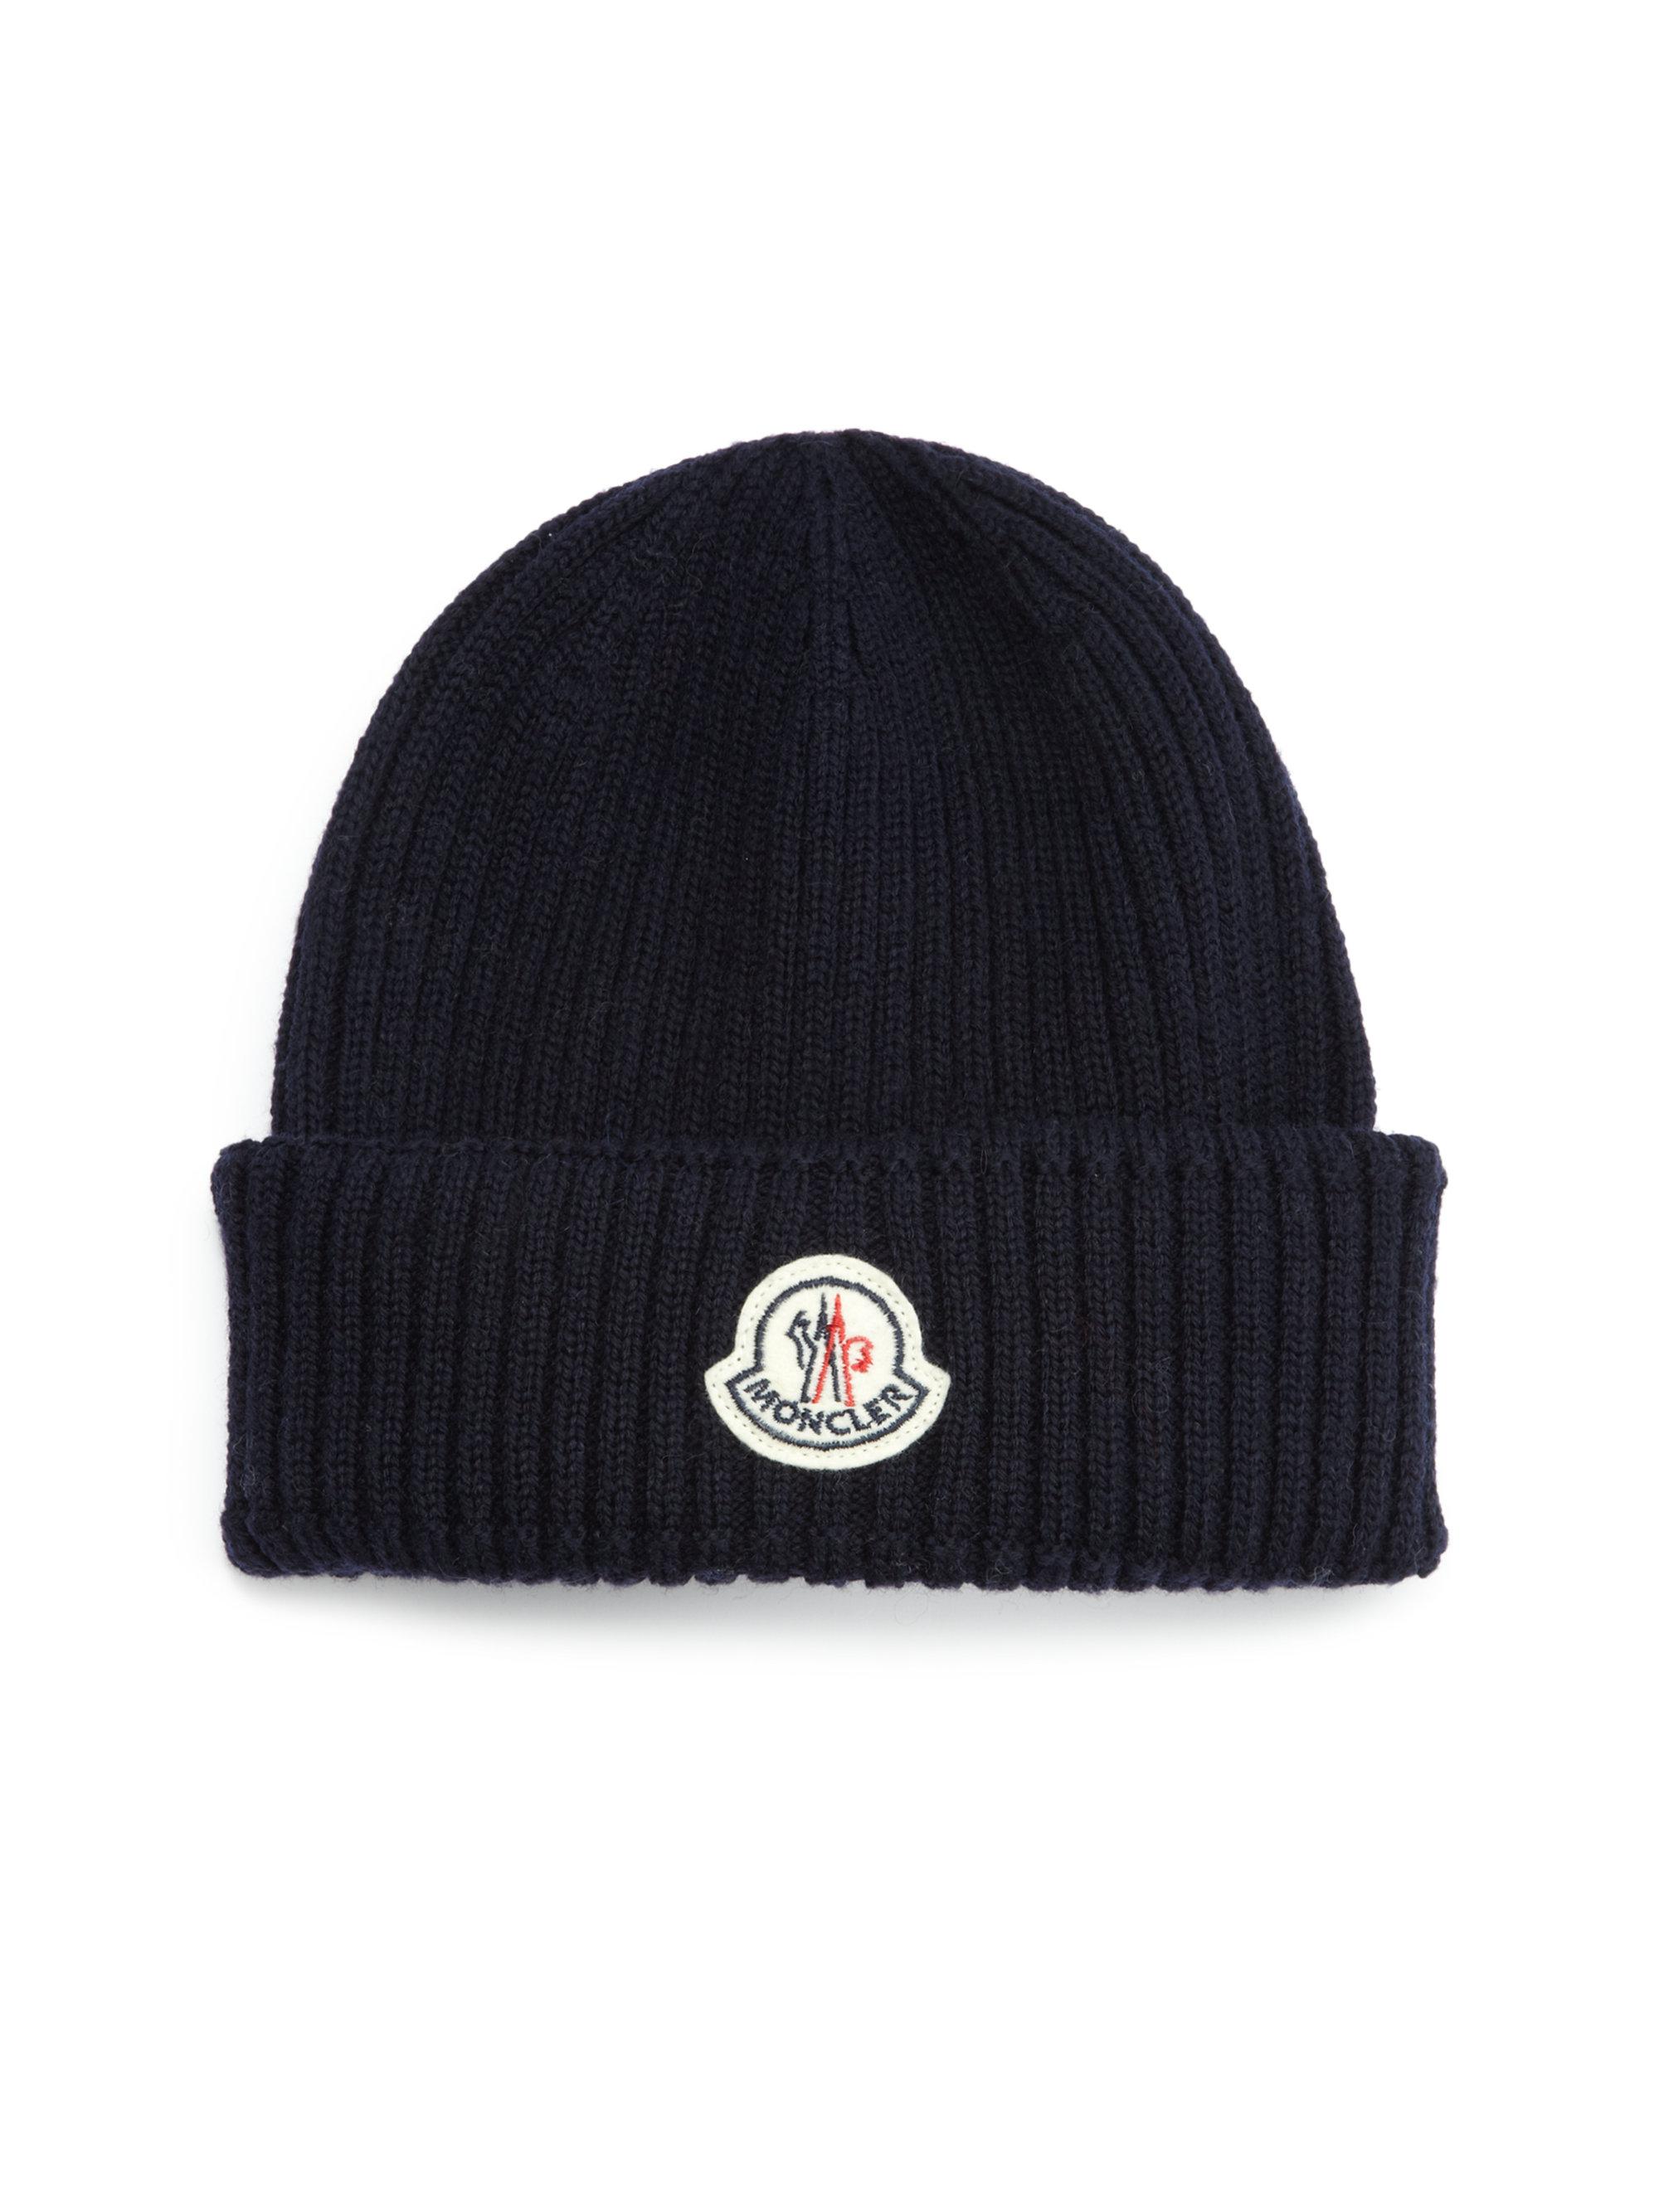 Moncler Cable-knit Virgin Wool Beanie in Dark Blue (Blue) for Men - Lyst